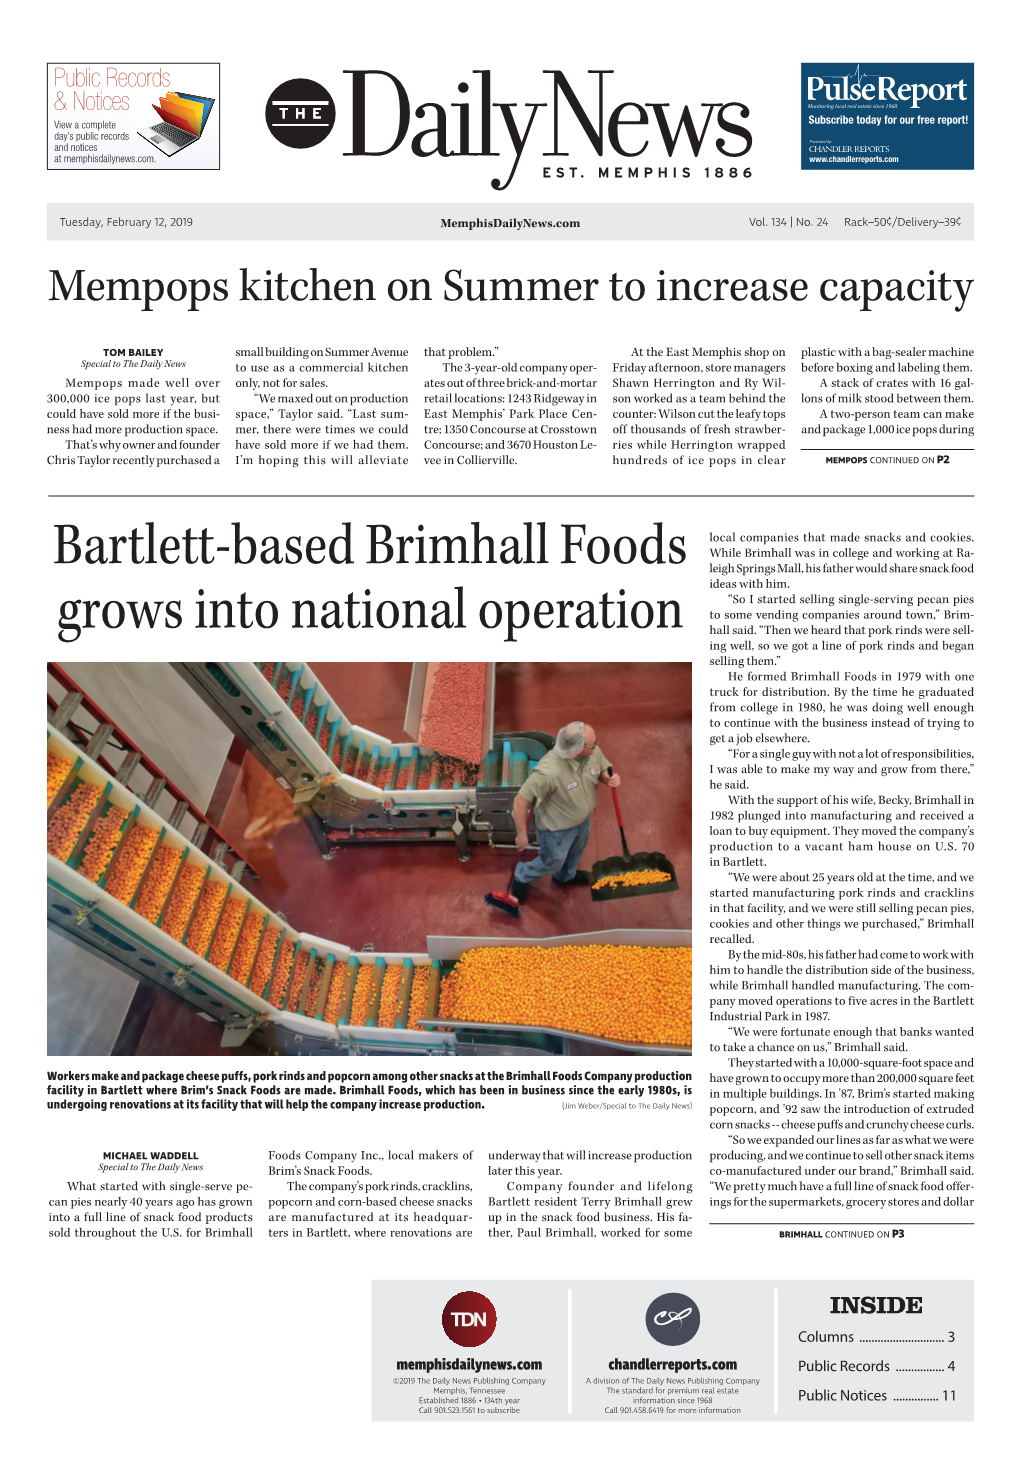 Bartlett-Based Brimhall Foods Grows Into National Operation